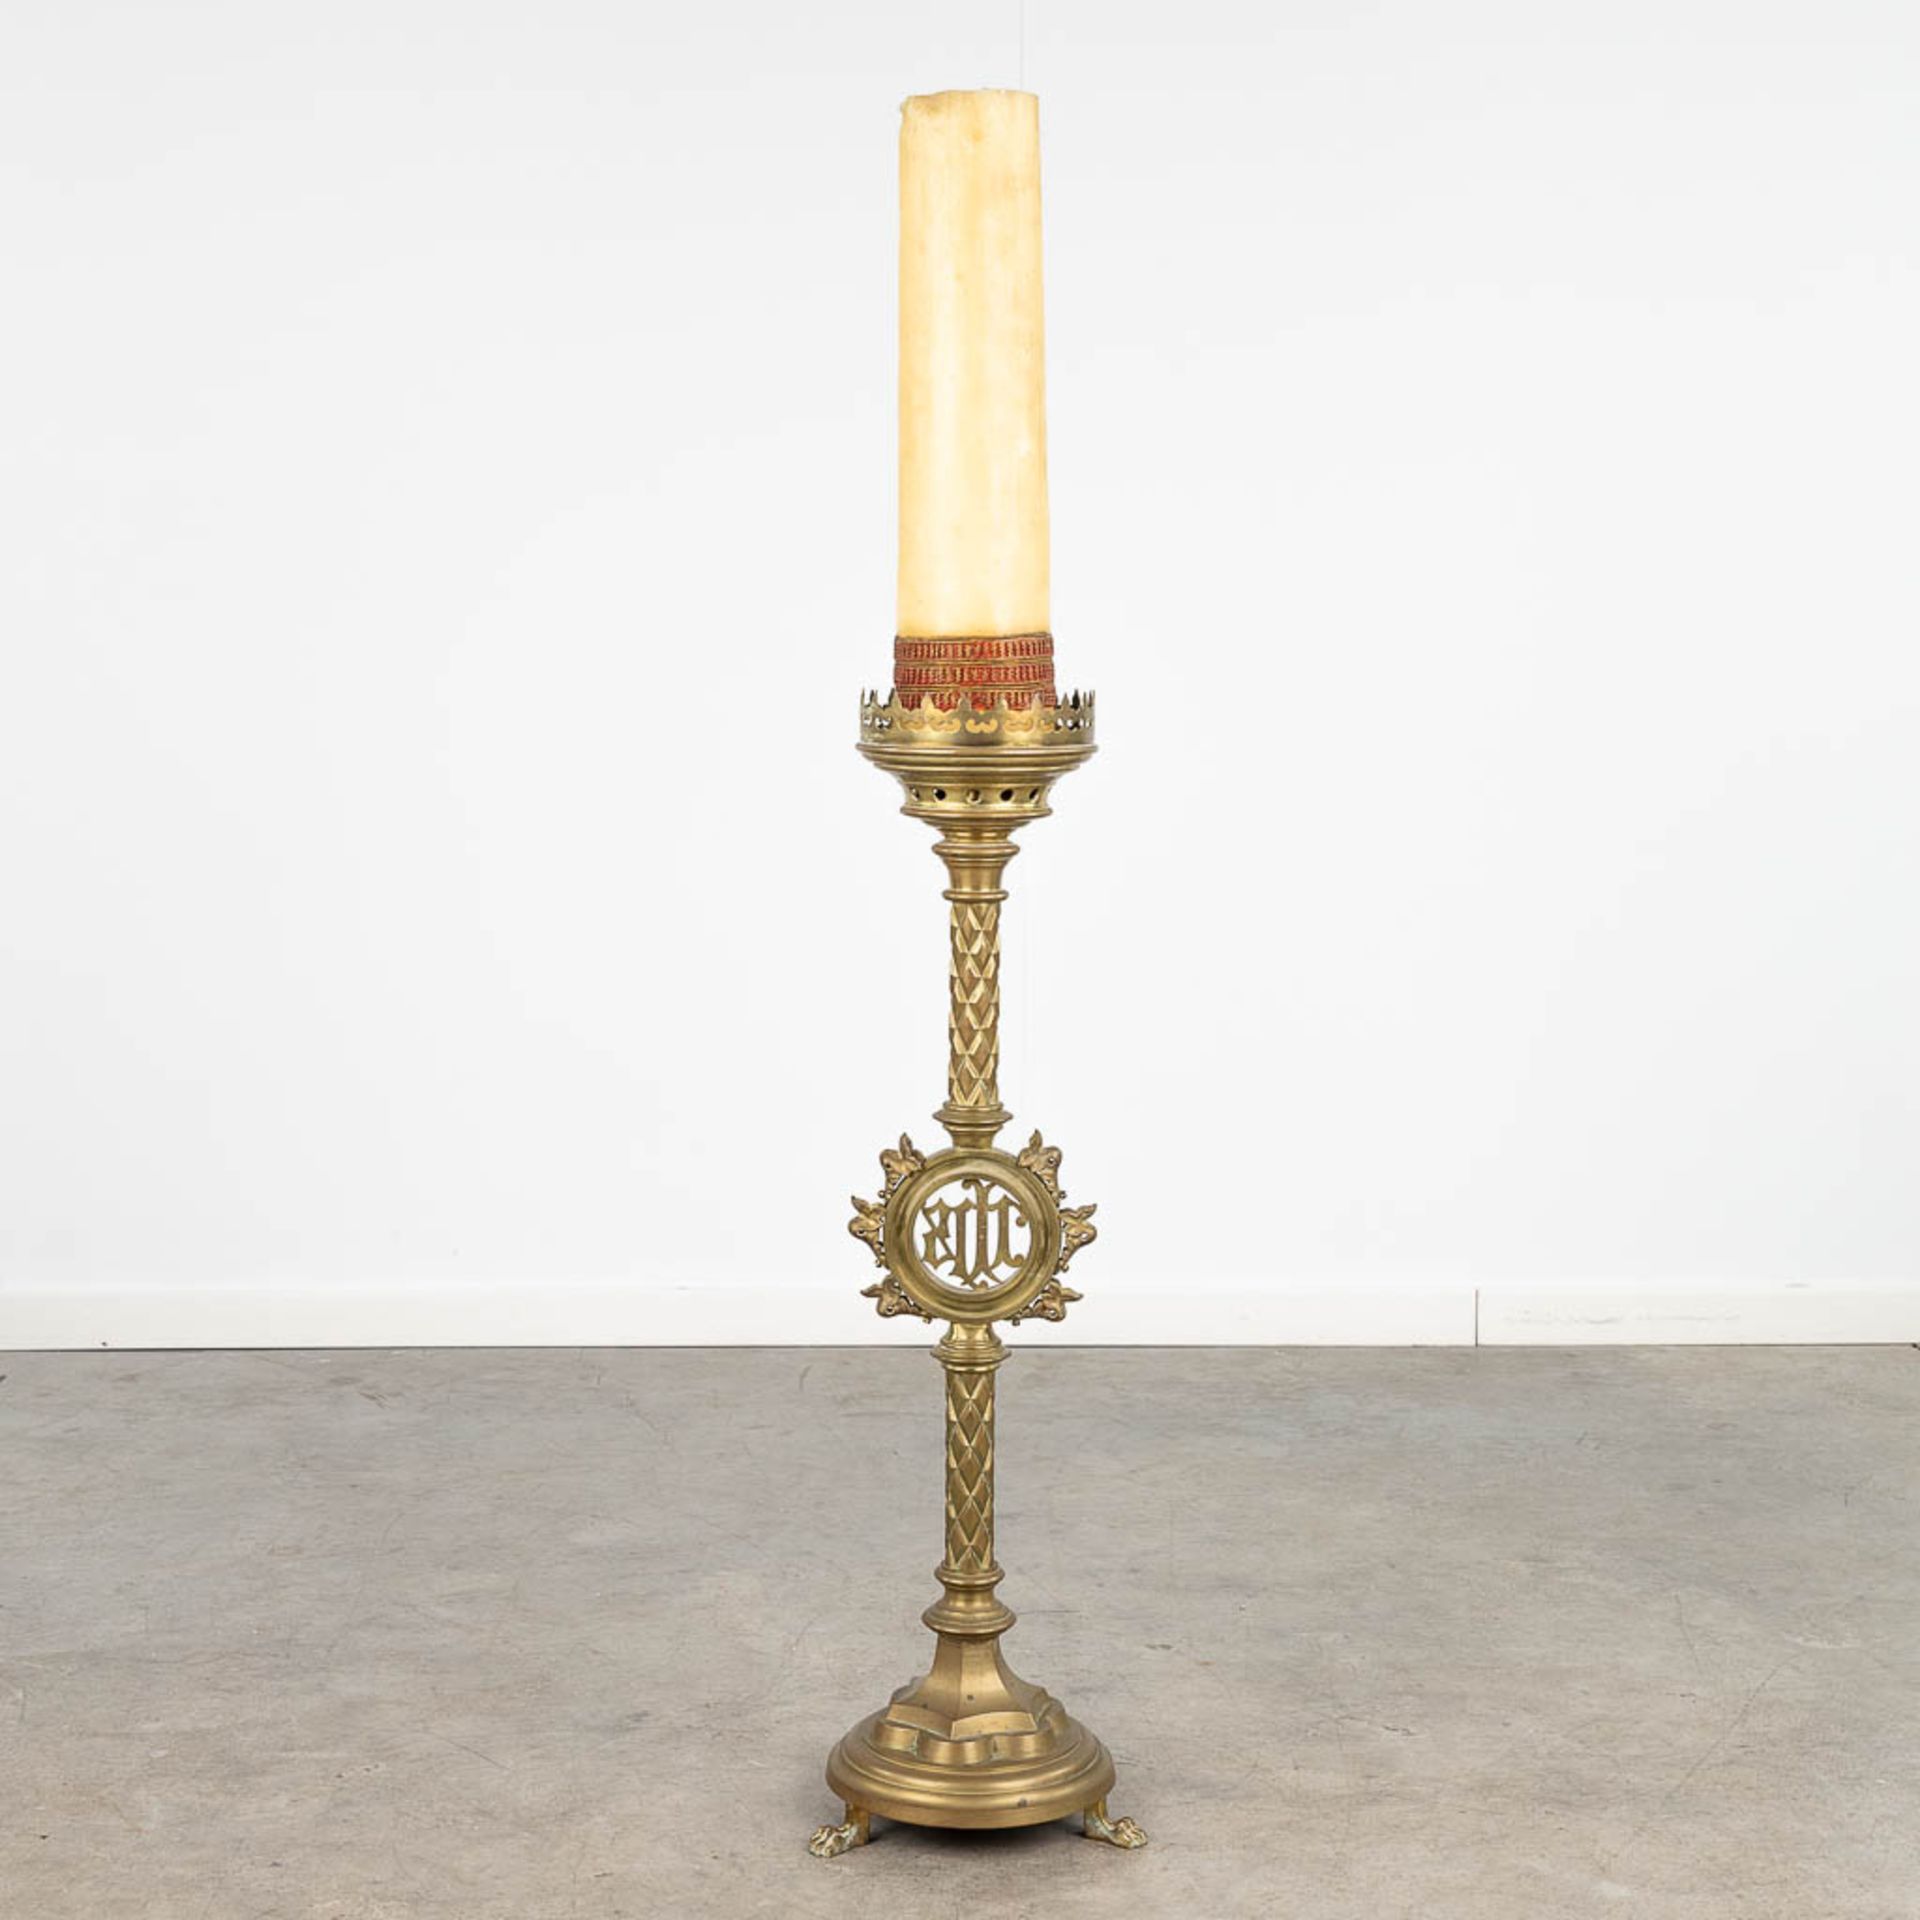 A large candlestick made of bronze, decorated with IHS logo. Gothic Revival style. (H: 92 cm) - Image 4 of 10